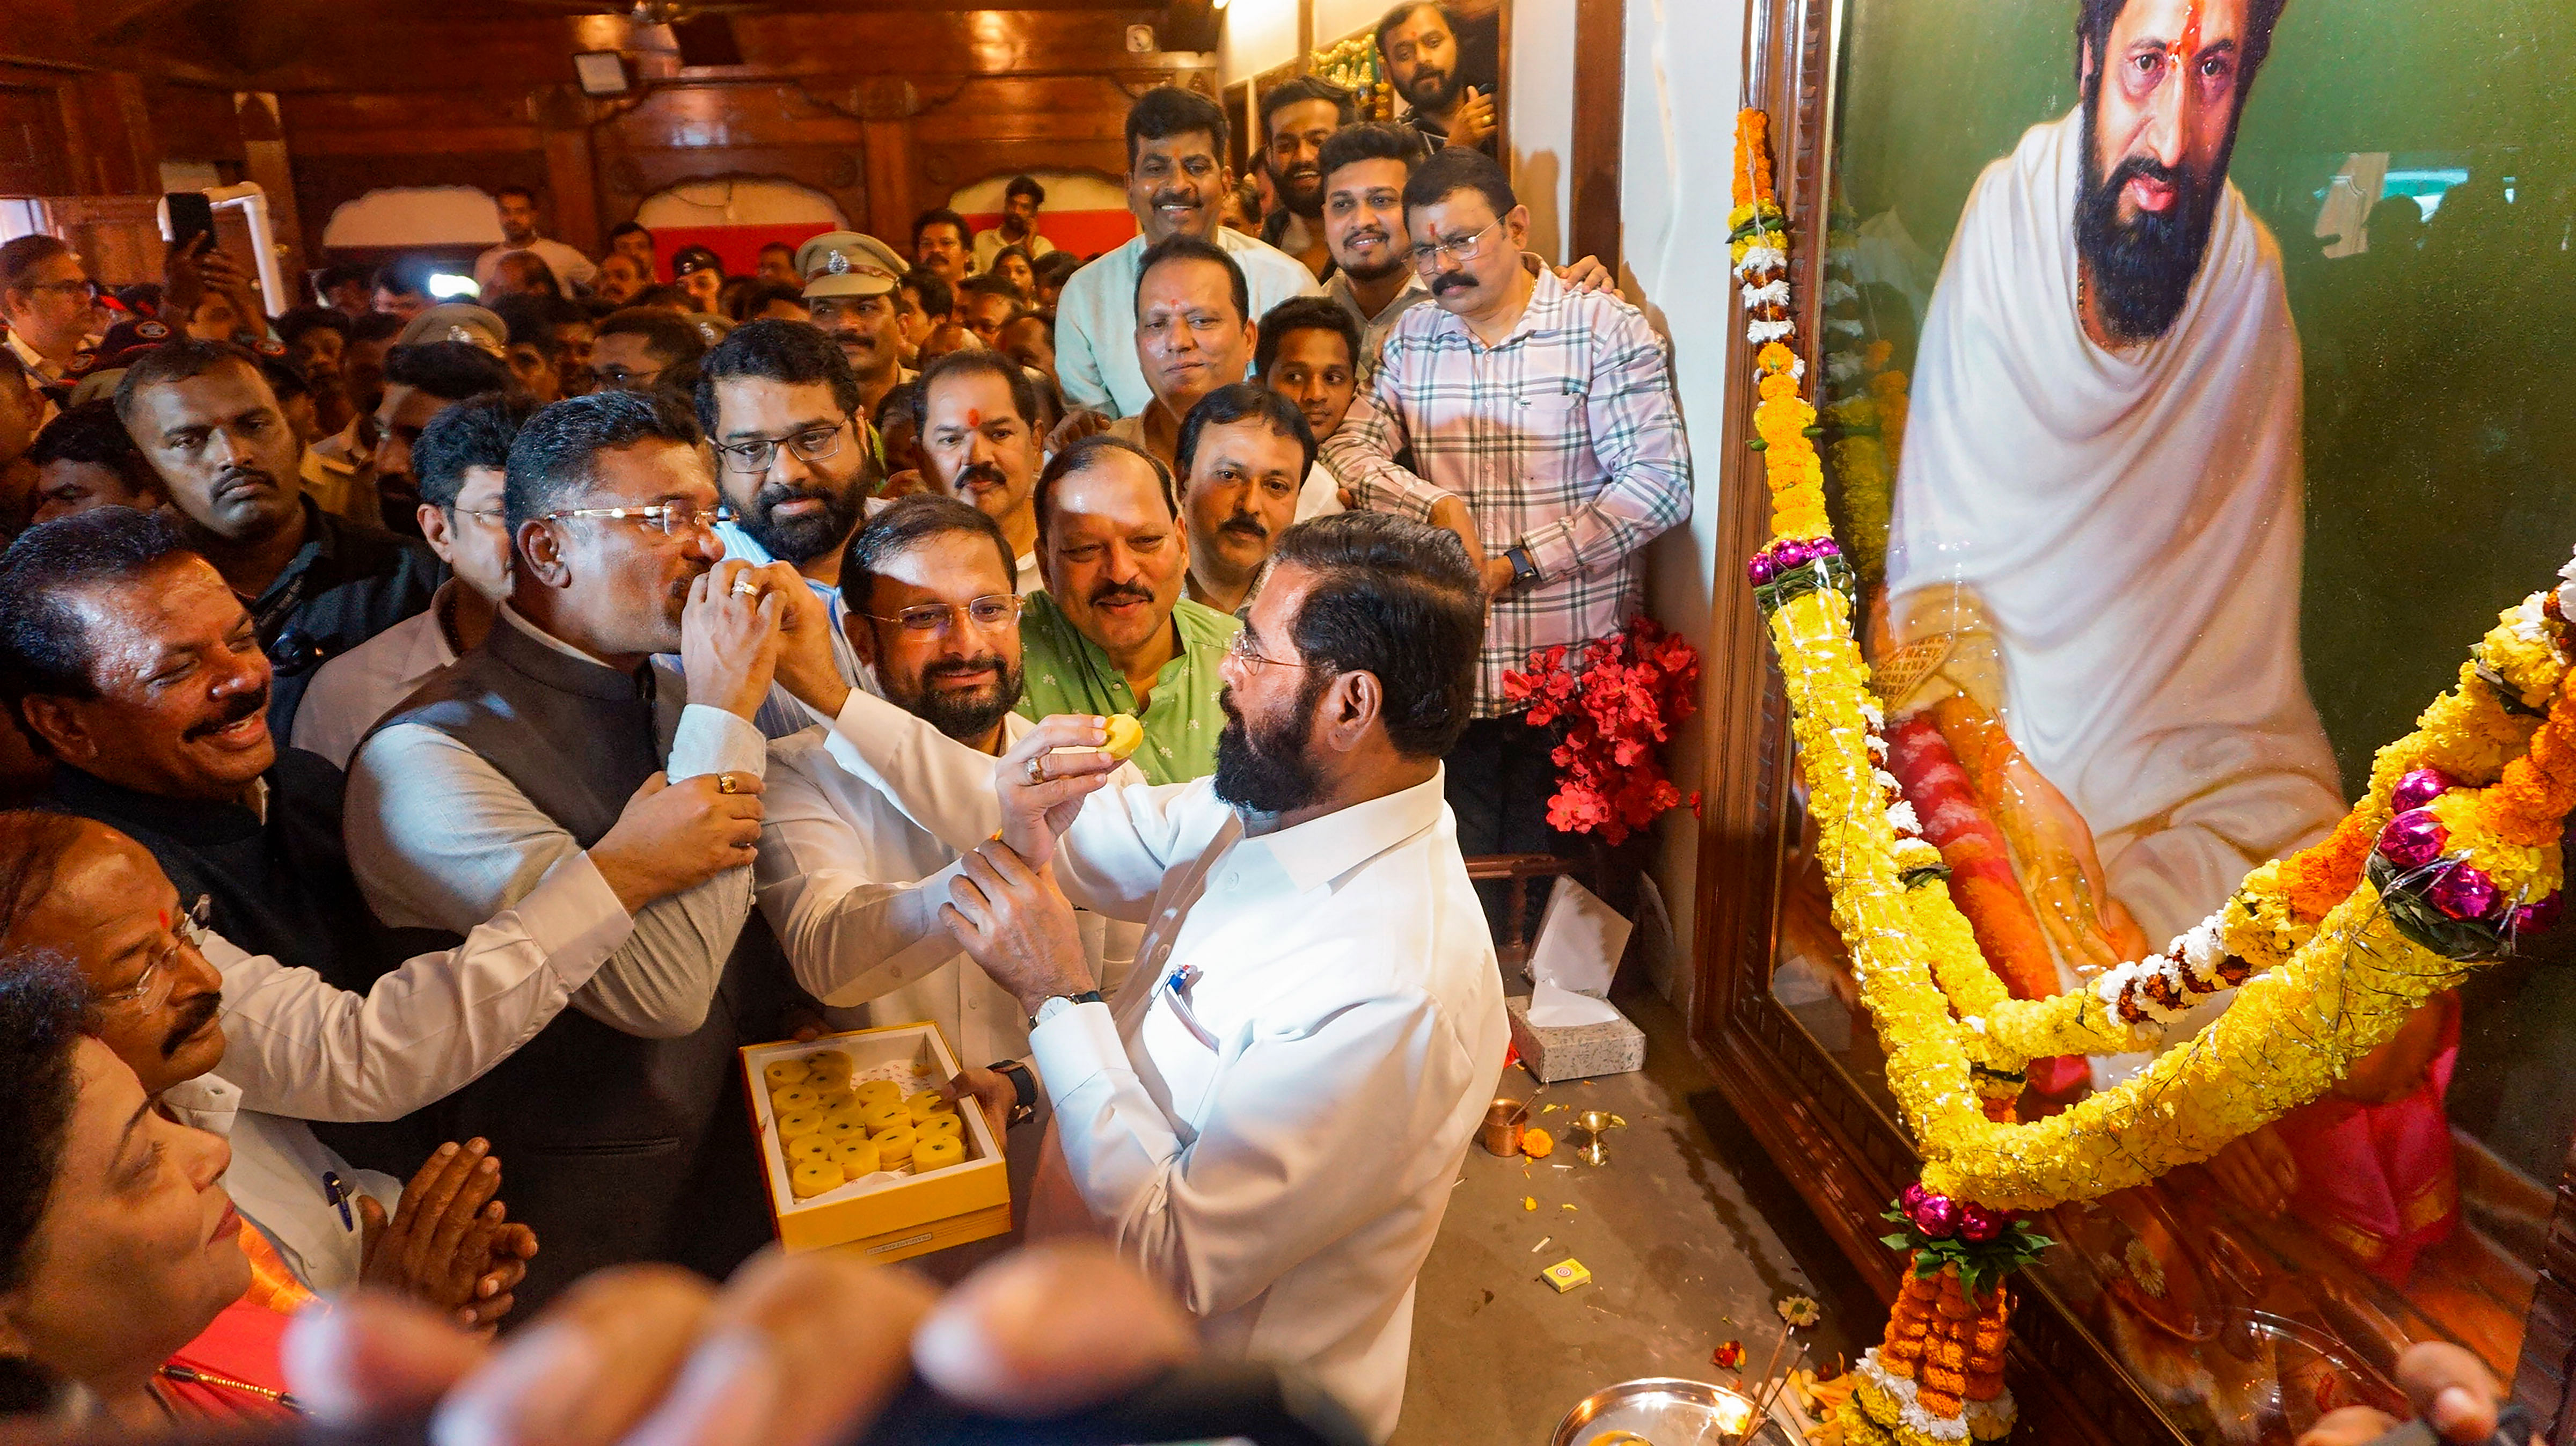 <div class="paragraphs"><p>Maharashtra Chief Minister Eknath Shinde with supporters during celebrations of Shiv Sena MLA disqualification case verdict, in Thane, Thursday, Jan. 11, 2024. Maharashtra Assembly Speaker Rahul Narwekar on Wednesday held that the Shiv Sena faction led by Shinde was the 'real political party' when rival groups emerged in June 2022, and did not disqualify any MLA from the two camps. </p></div>